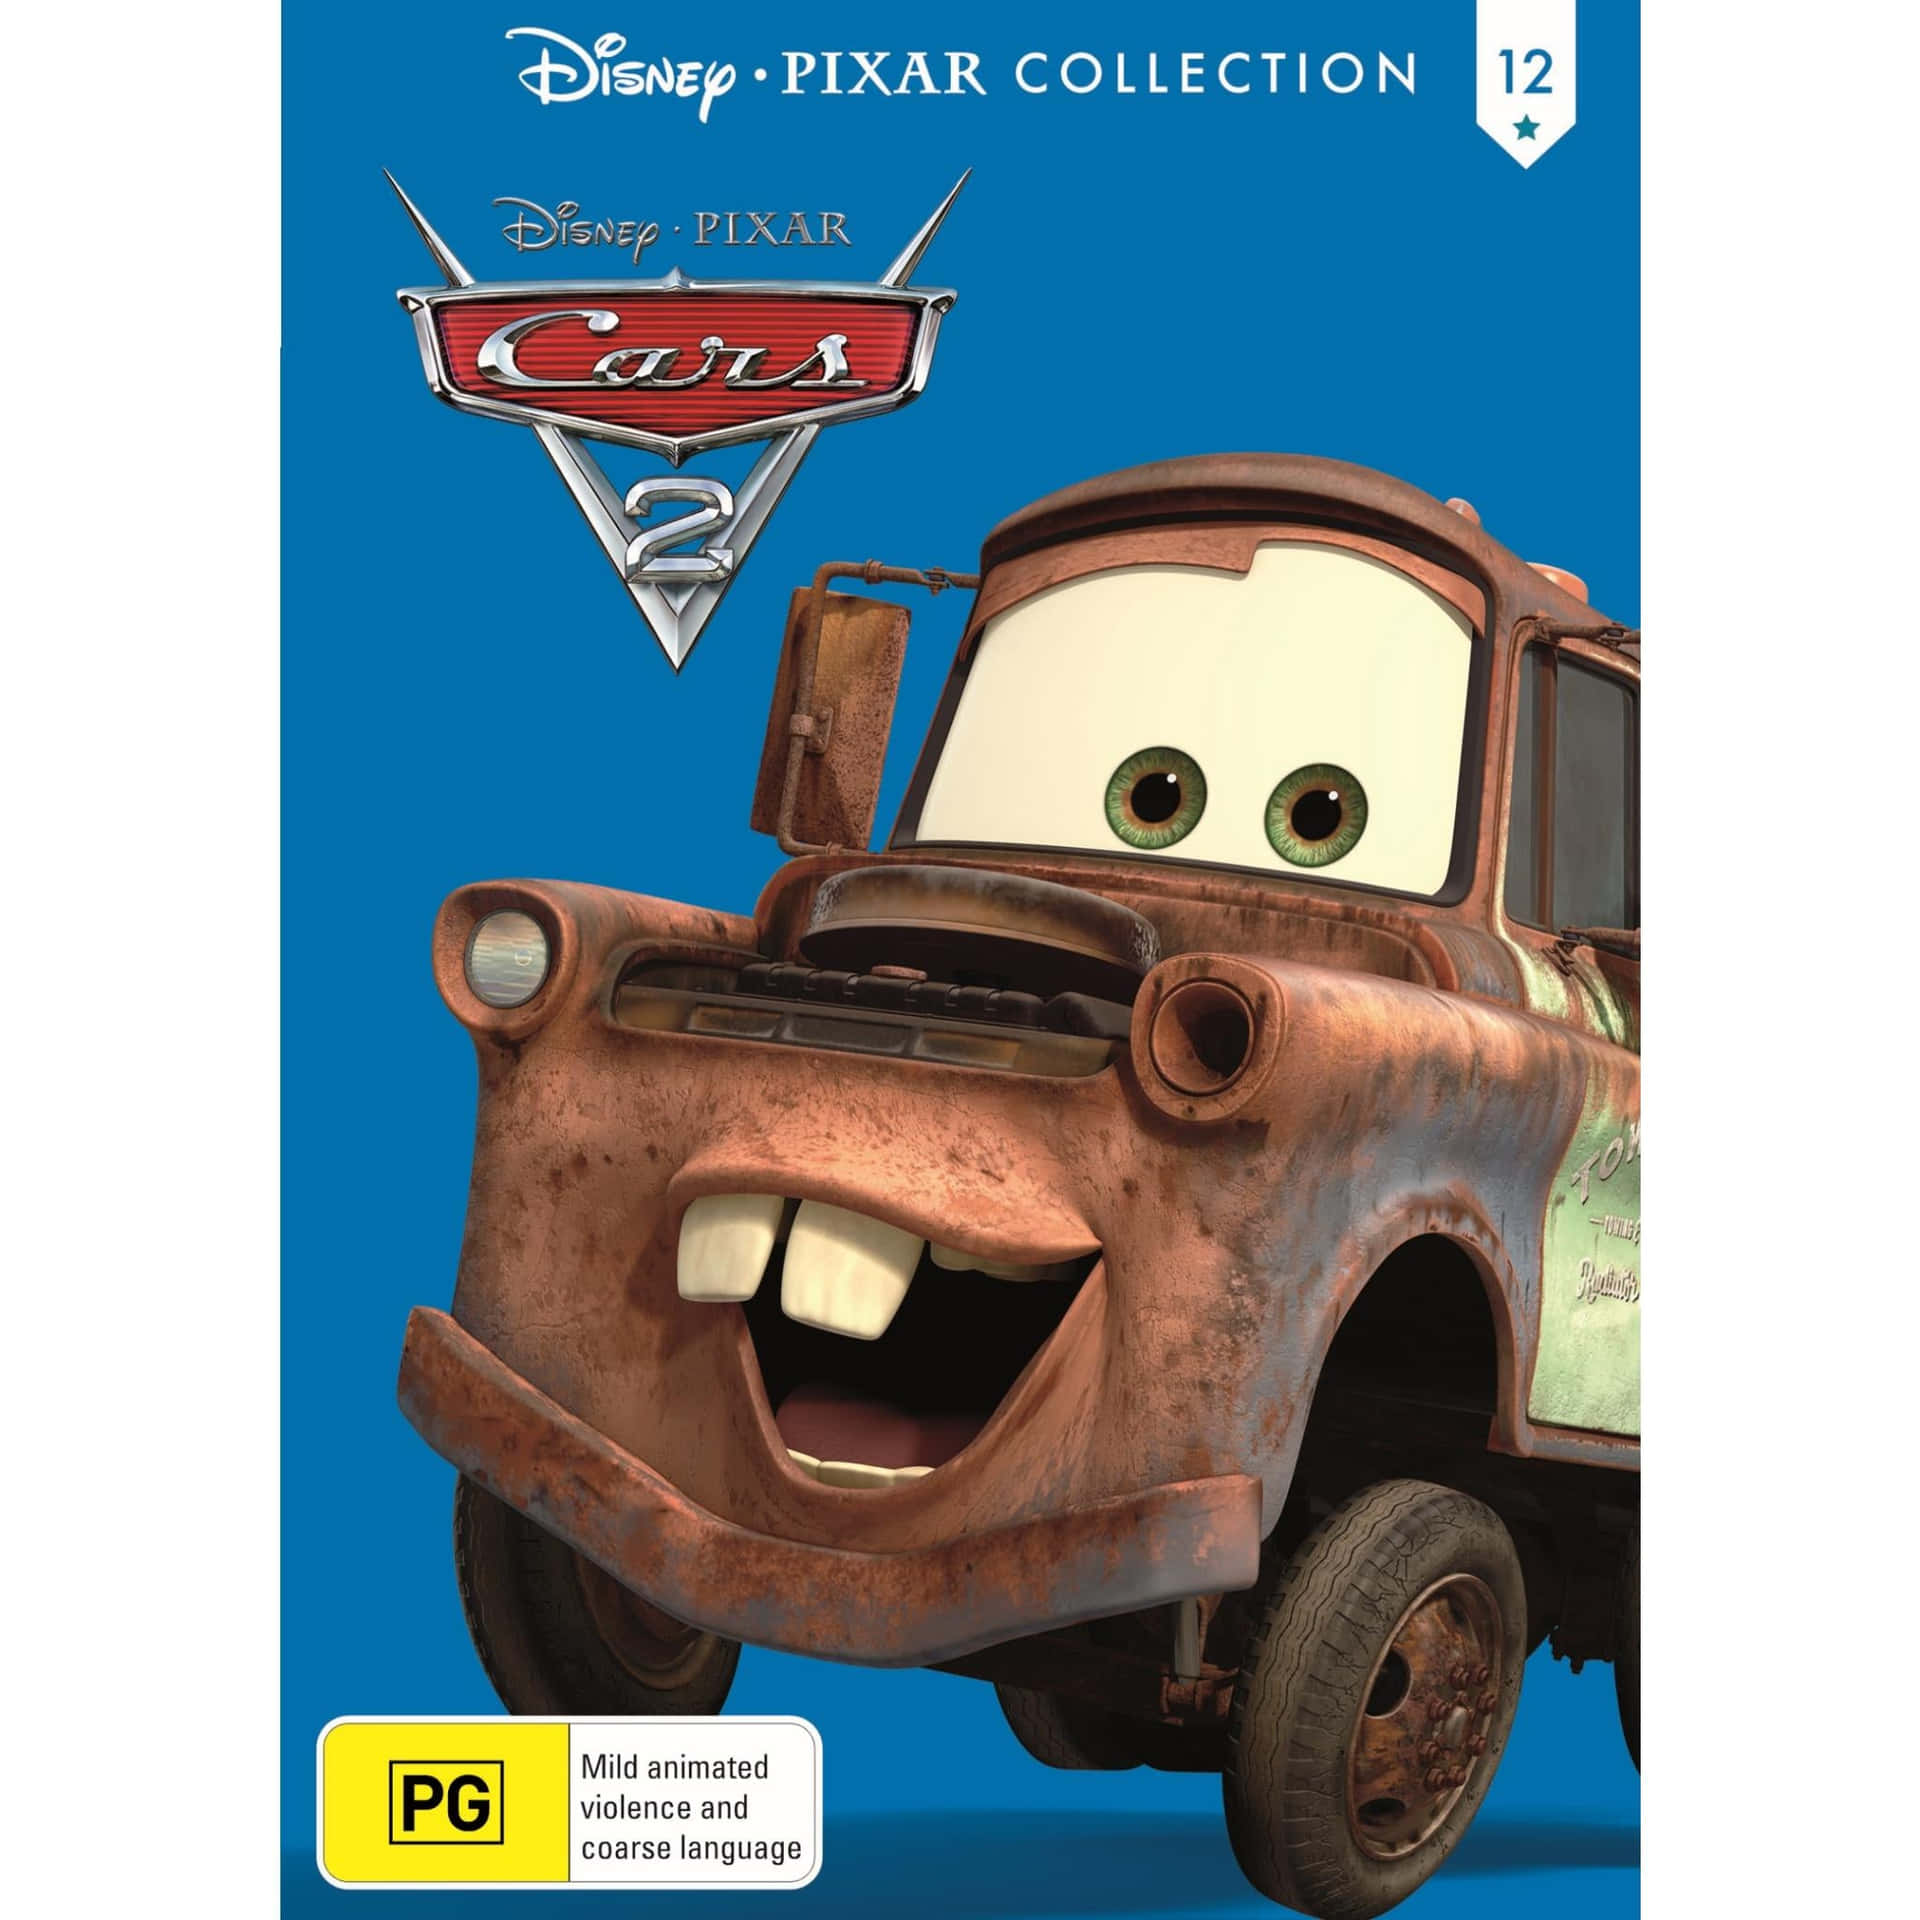 Lightning McQueen and Mater racing along the highway in Cars 2